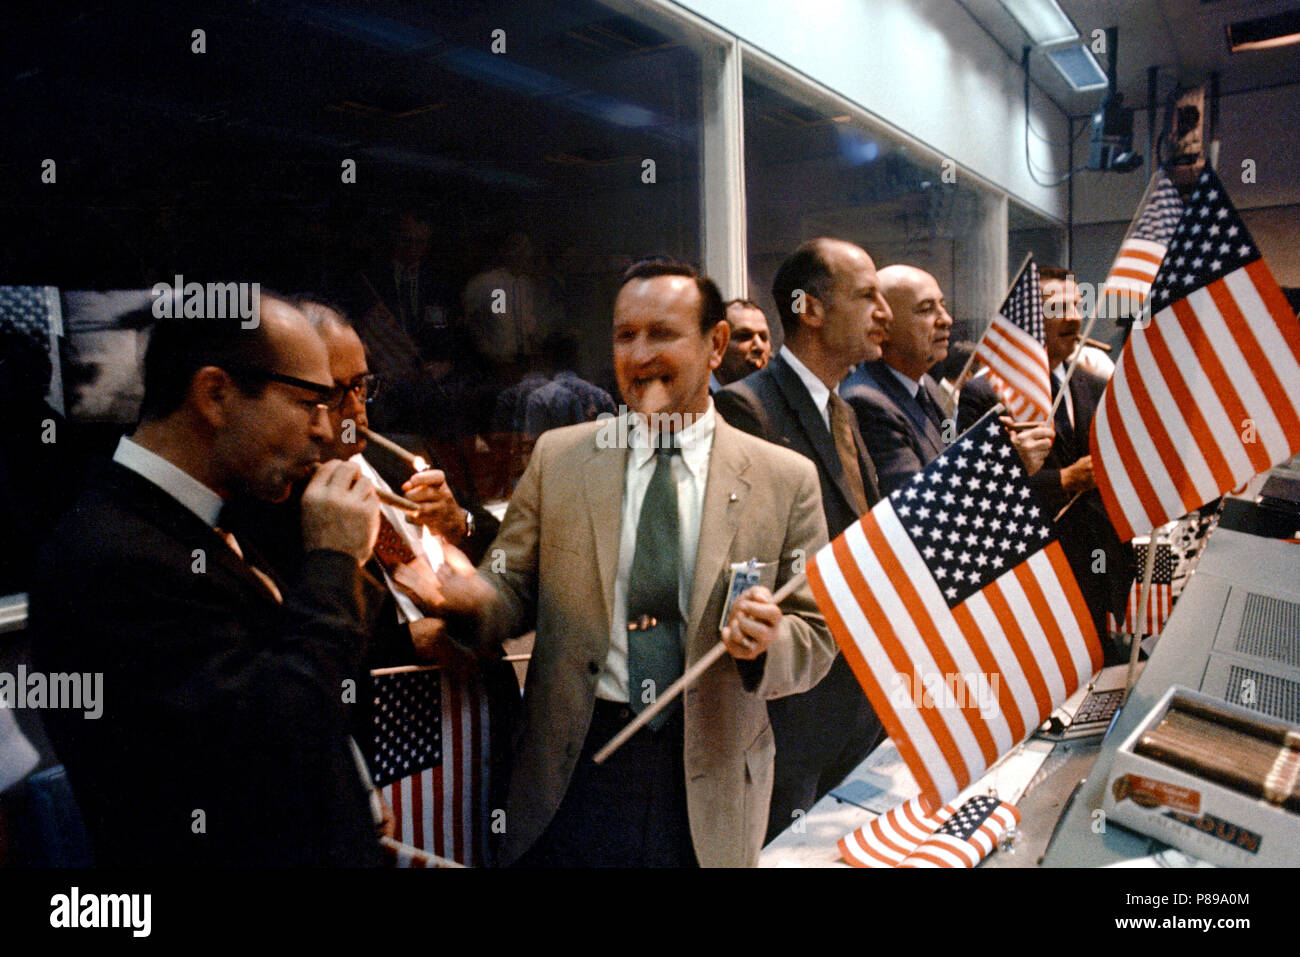 NASA and Manned Spacecraft Center officials join w flight controllers in the Mission Operations Control Room in celebrating the successful conclusion of the Apollo 11 lunar landing mission. Stock Photo